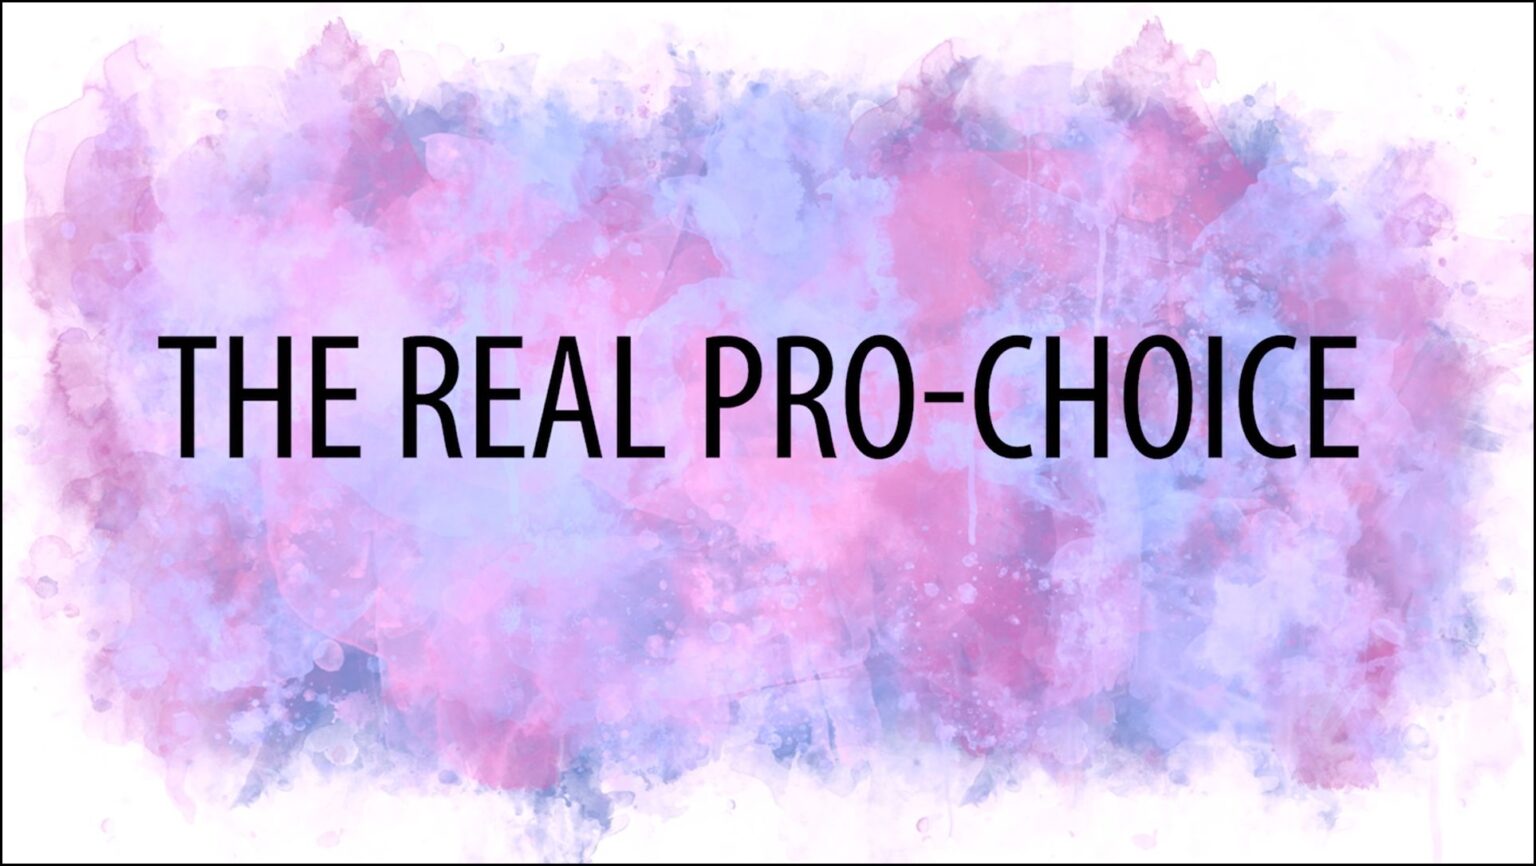 The Real Pro-Choice